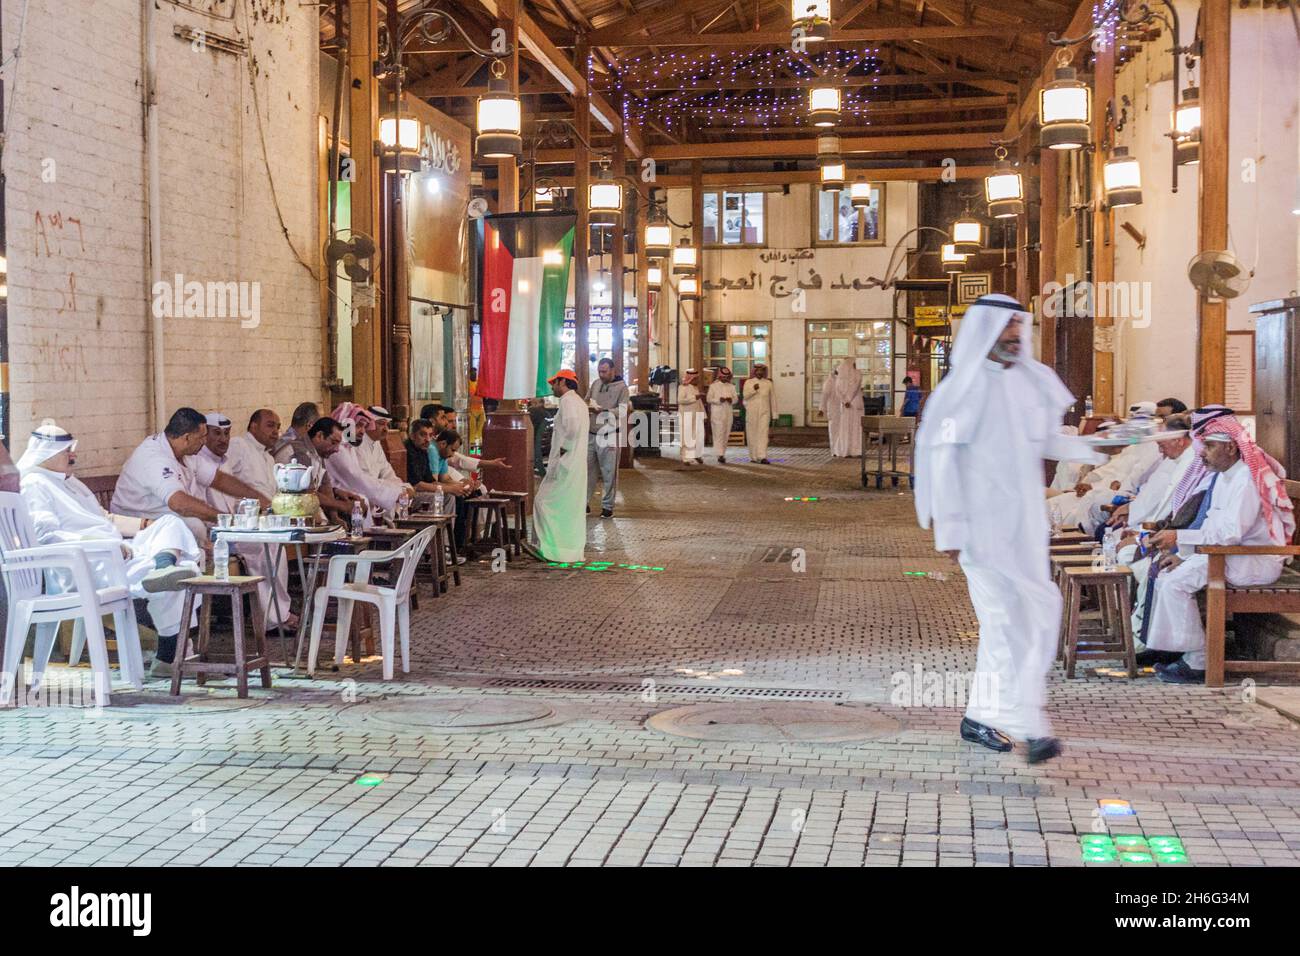 KUWAIT CITY, KUWAIT - MARCH 17, 2017: Local men at the traditional cafe at the central Souq in Kuwait City Stock Photo